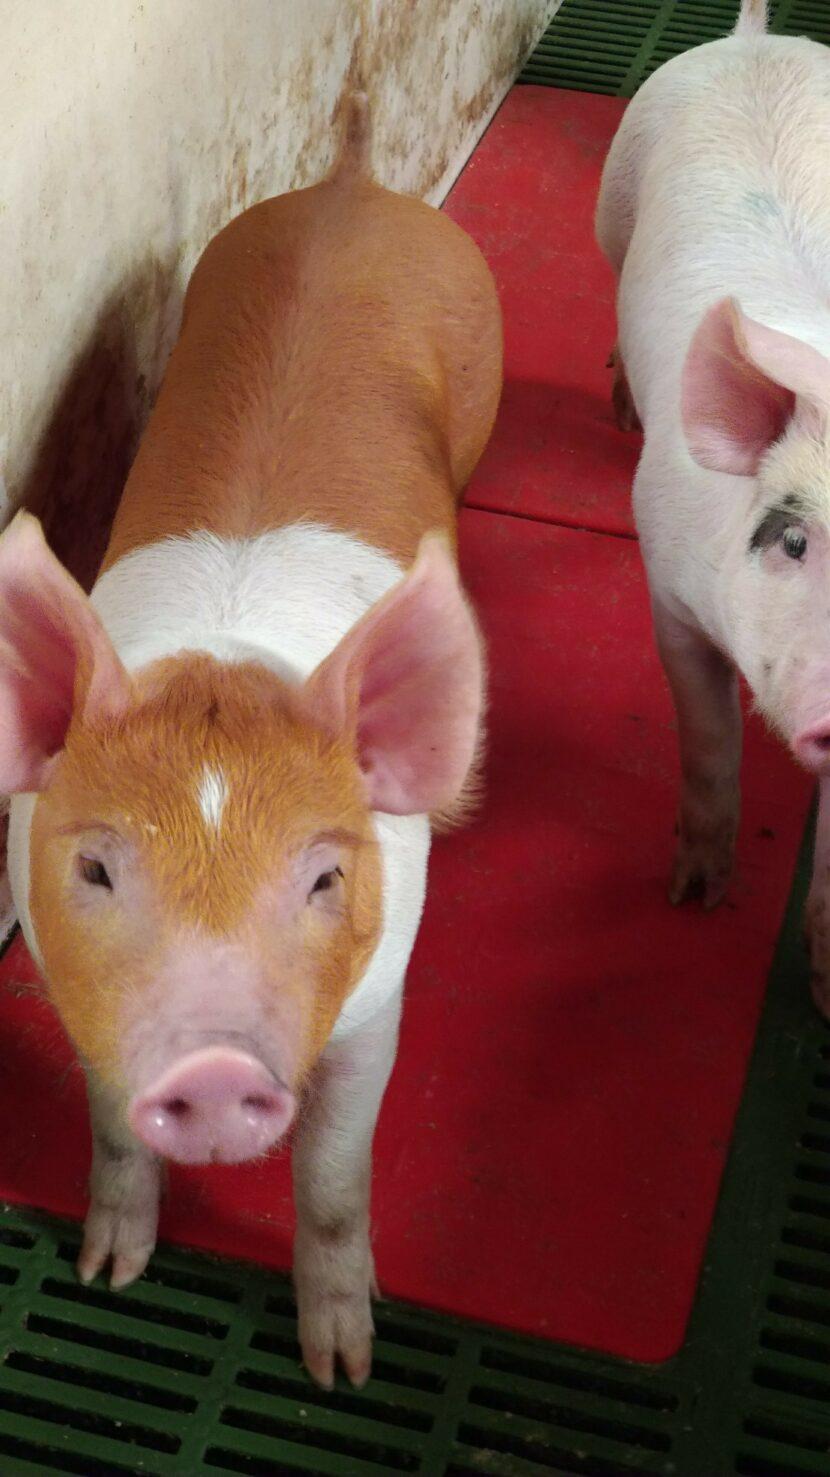 The facts of pig farming